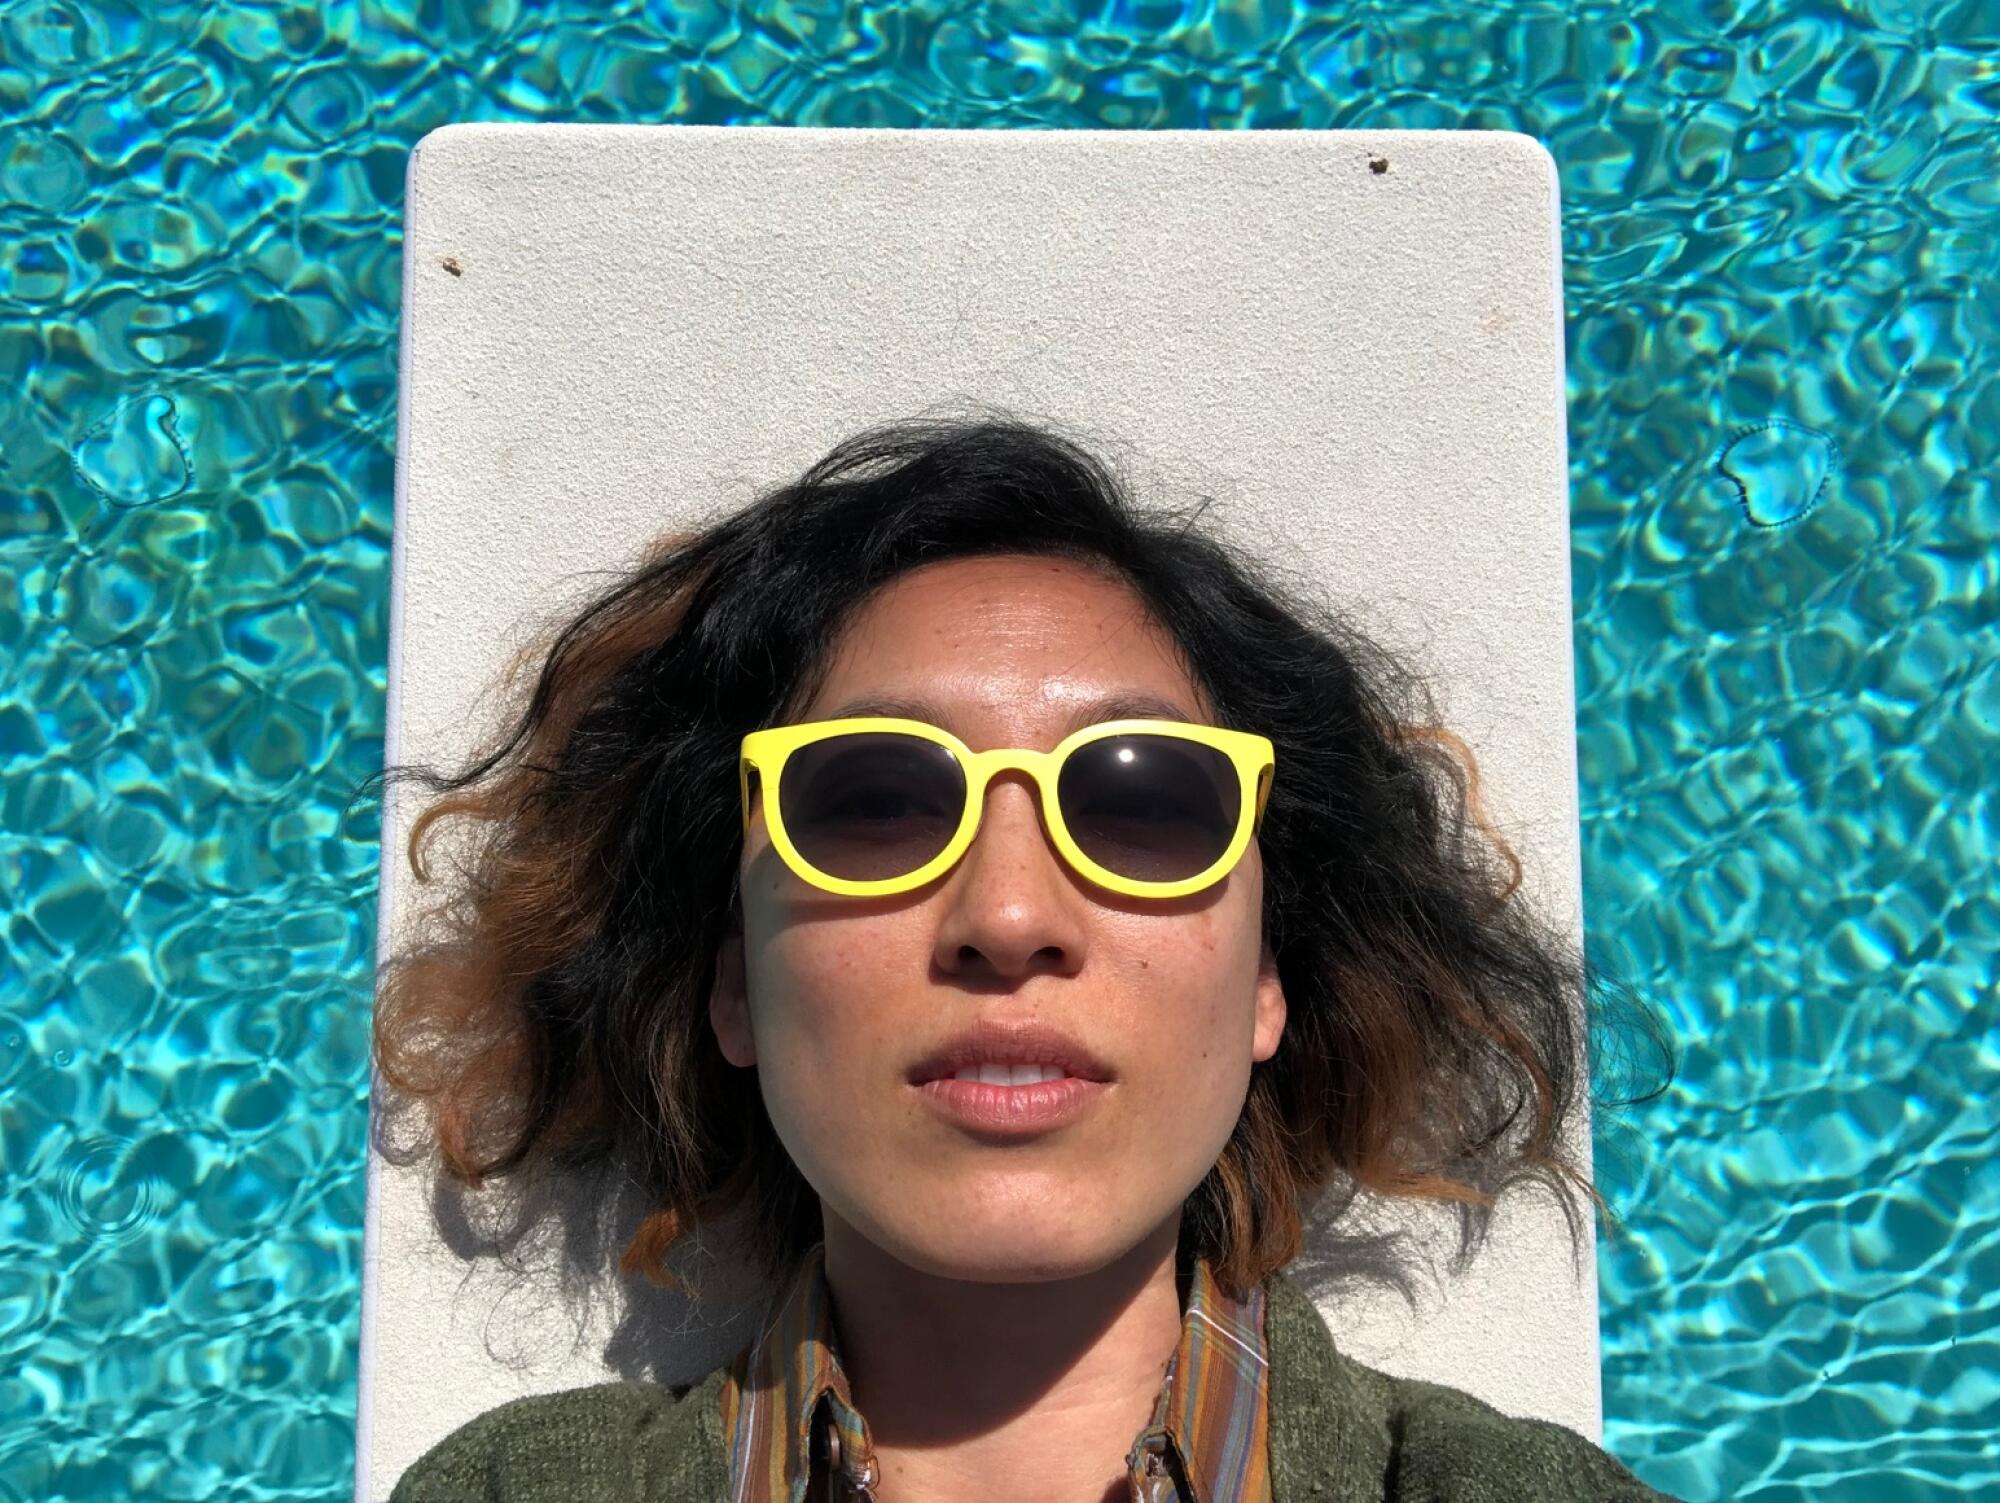  "Palm Springs" director of photography Quyen Tran